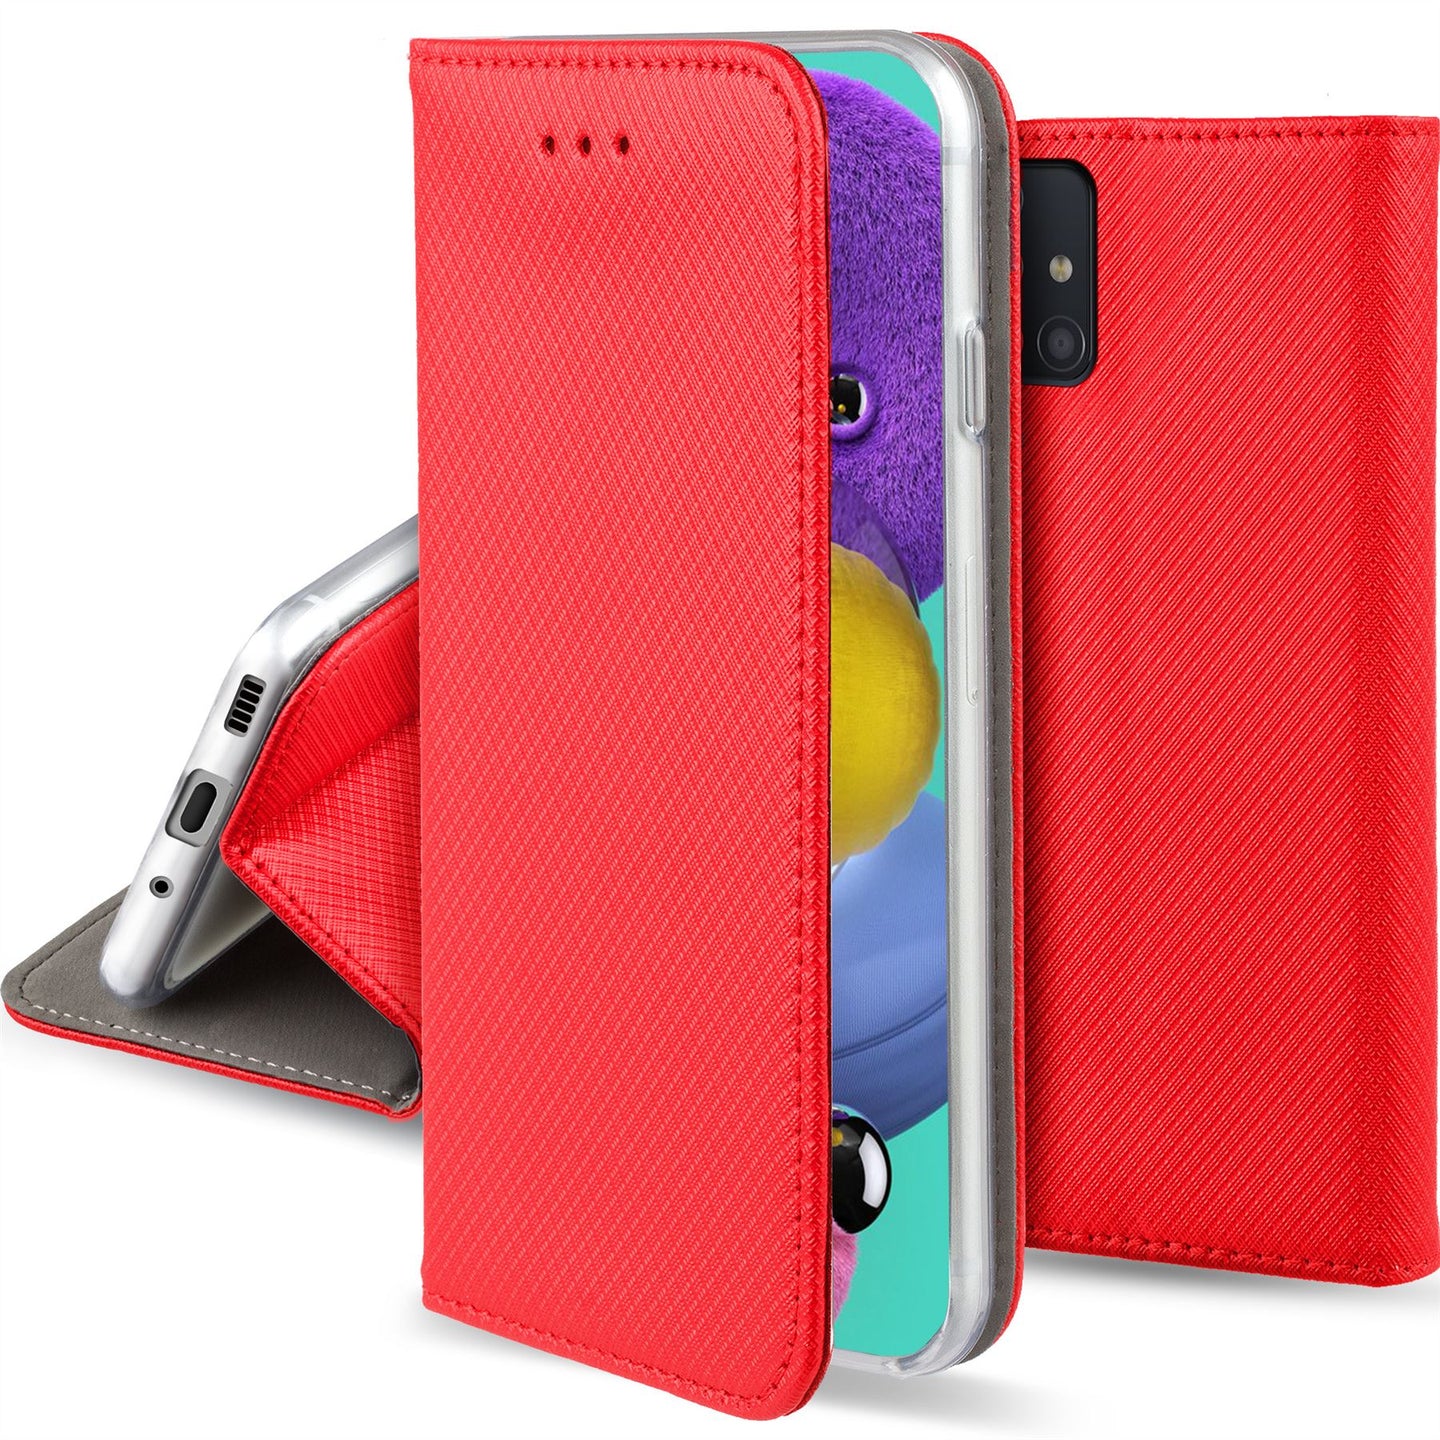 Moozy Case Flip Cover for Samsung A51, Red - Smart Magnetic Flip Case with Card Holder and Stand